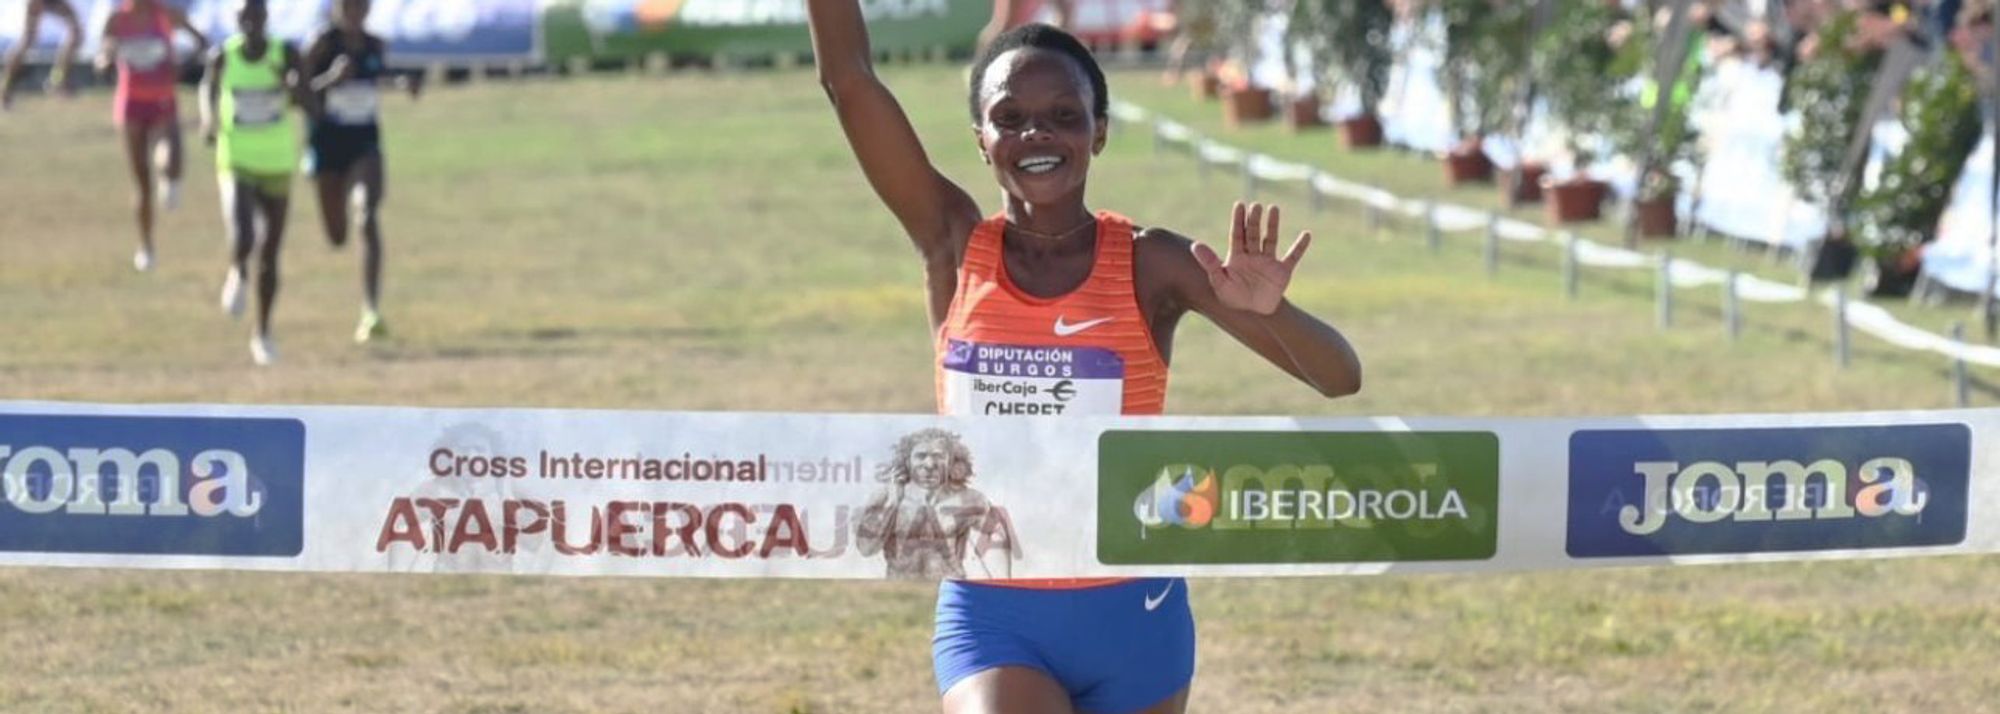 Kenya's Beatrice Chebet and Ethiopia's Berihu Aregawi will be the marquee athletes at the Cross Internacional Juan Muguerza